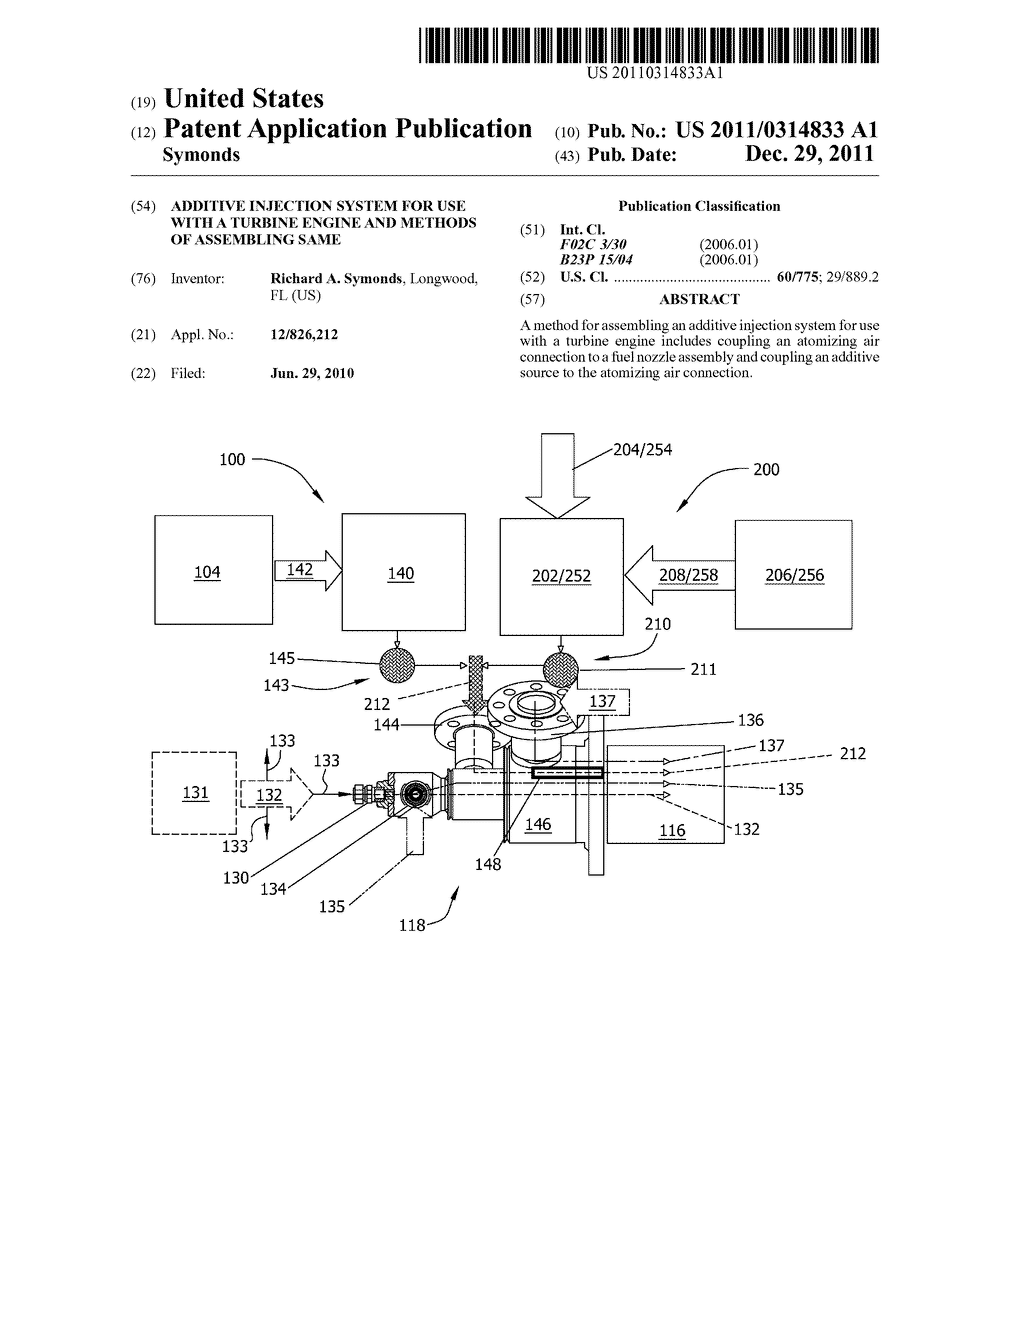 ADDITIVE INJECTION SYSTEM FOR USE WITH A TURBINE ENGINE AND METHODS OF     ASSEMBLING SAME - diagram, schematic, and image 01